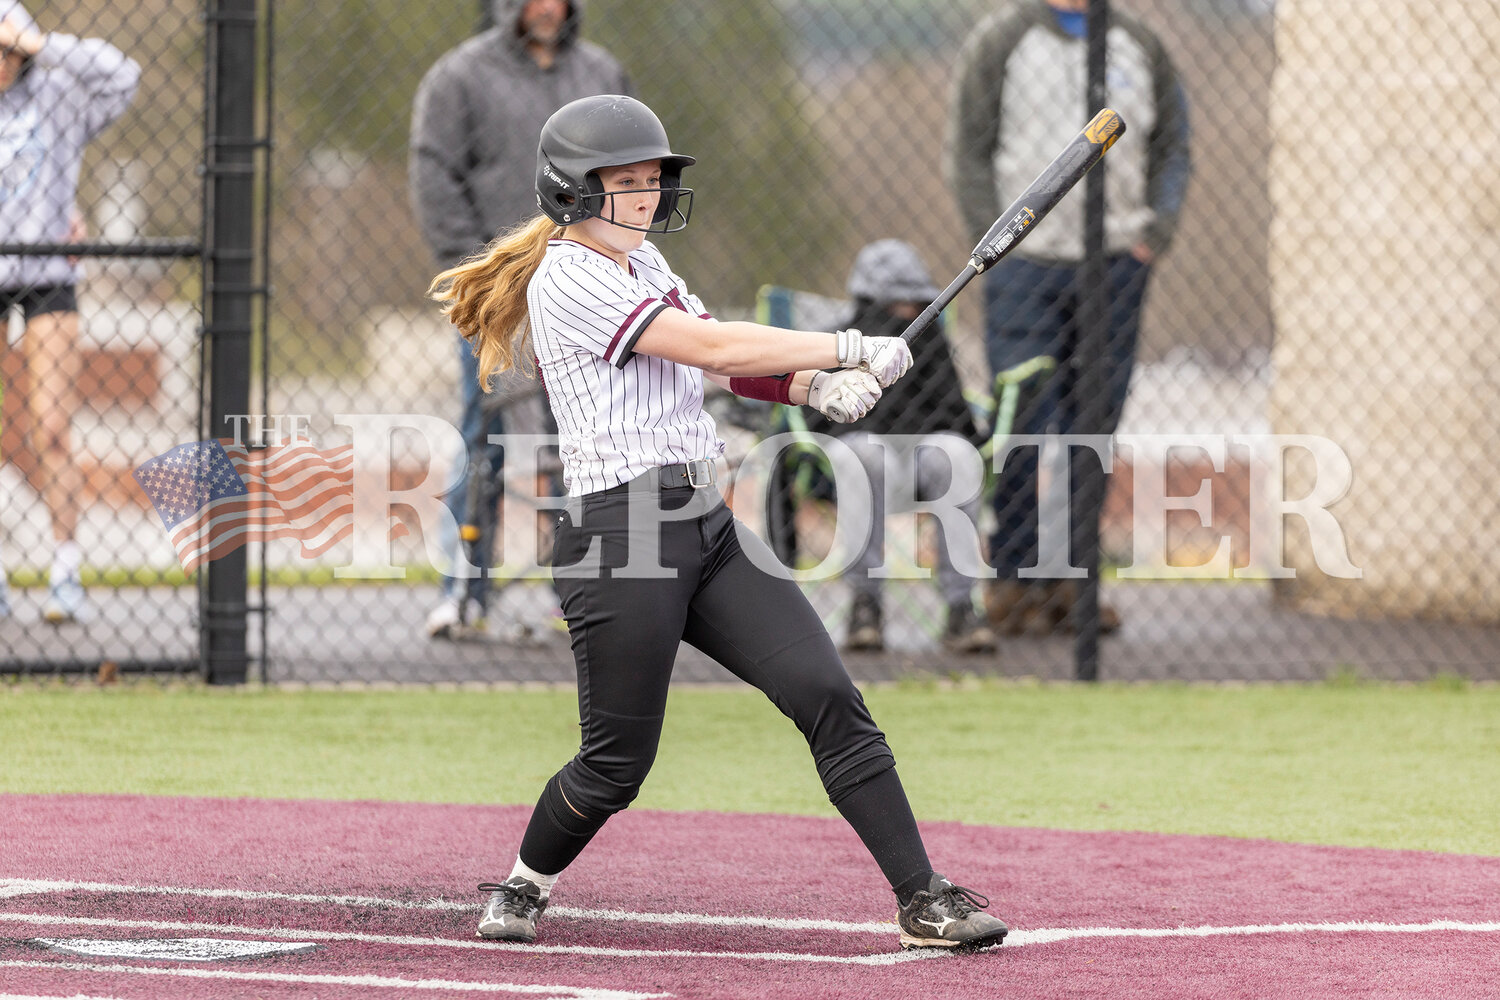 Sidney’s Chloie Taylor bats during her team’s win over Unatego Friday, April 12.